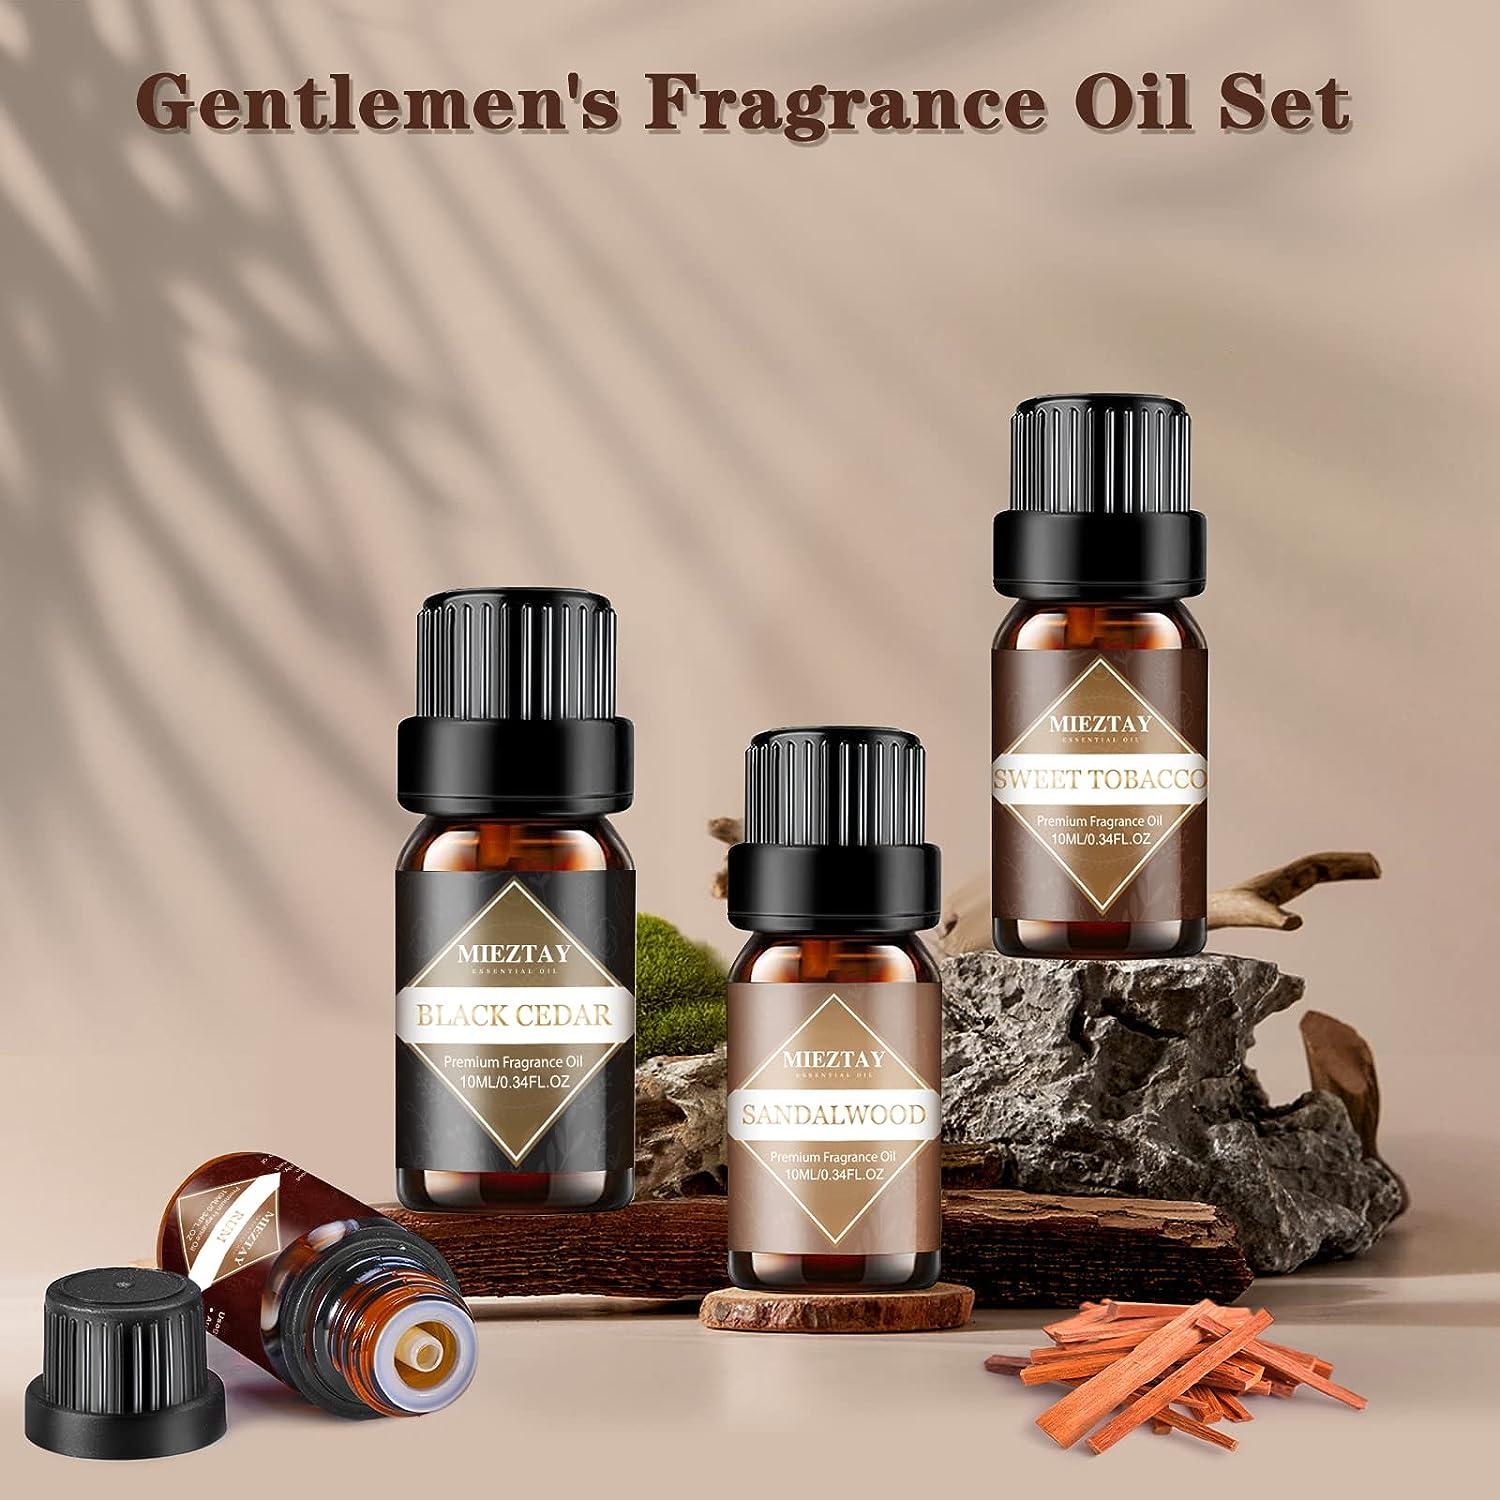  P&J Fragrance Oil Gentlemen's Set  Leather, Sweet Tobacco,  Teakwood, Bay Rum, Cedar, Sandalwood Candle Scents for Candle Making,  Freshie Scents, Soap Making Supplies, Diffuser Oil Scents : Books